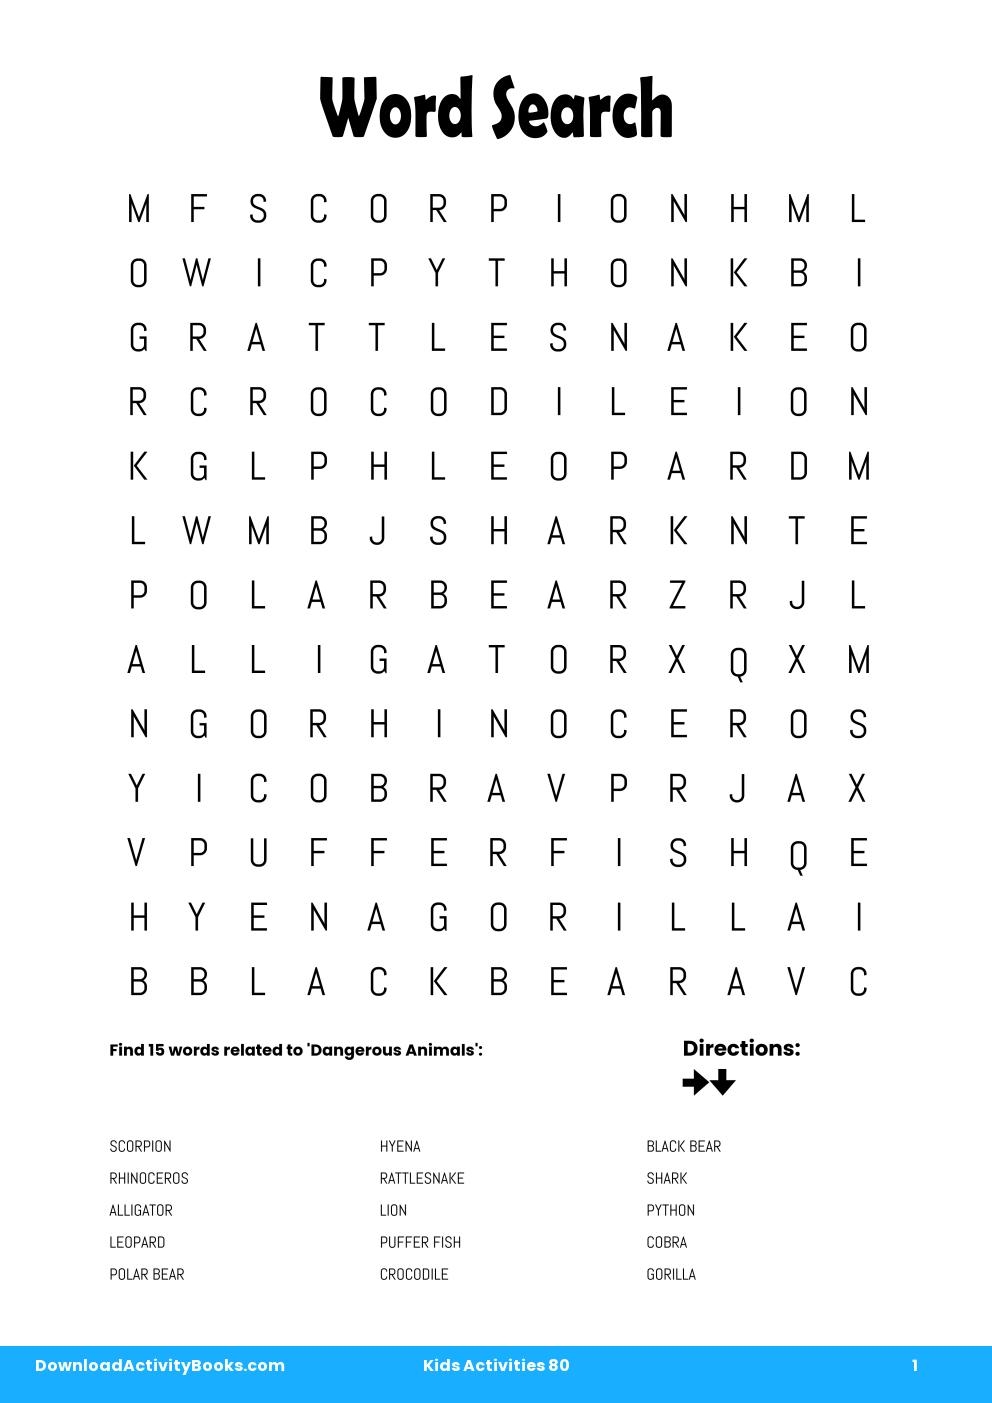 Word Search in Kids Activities 80